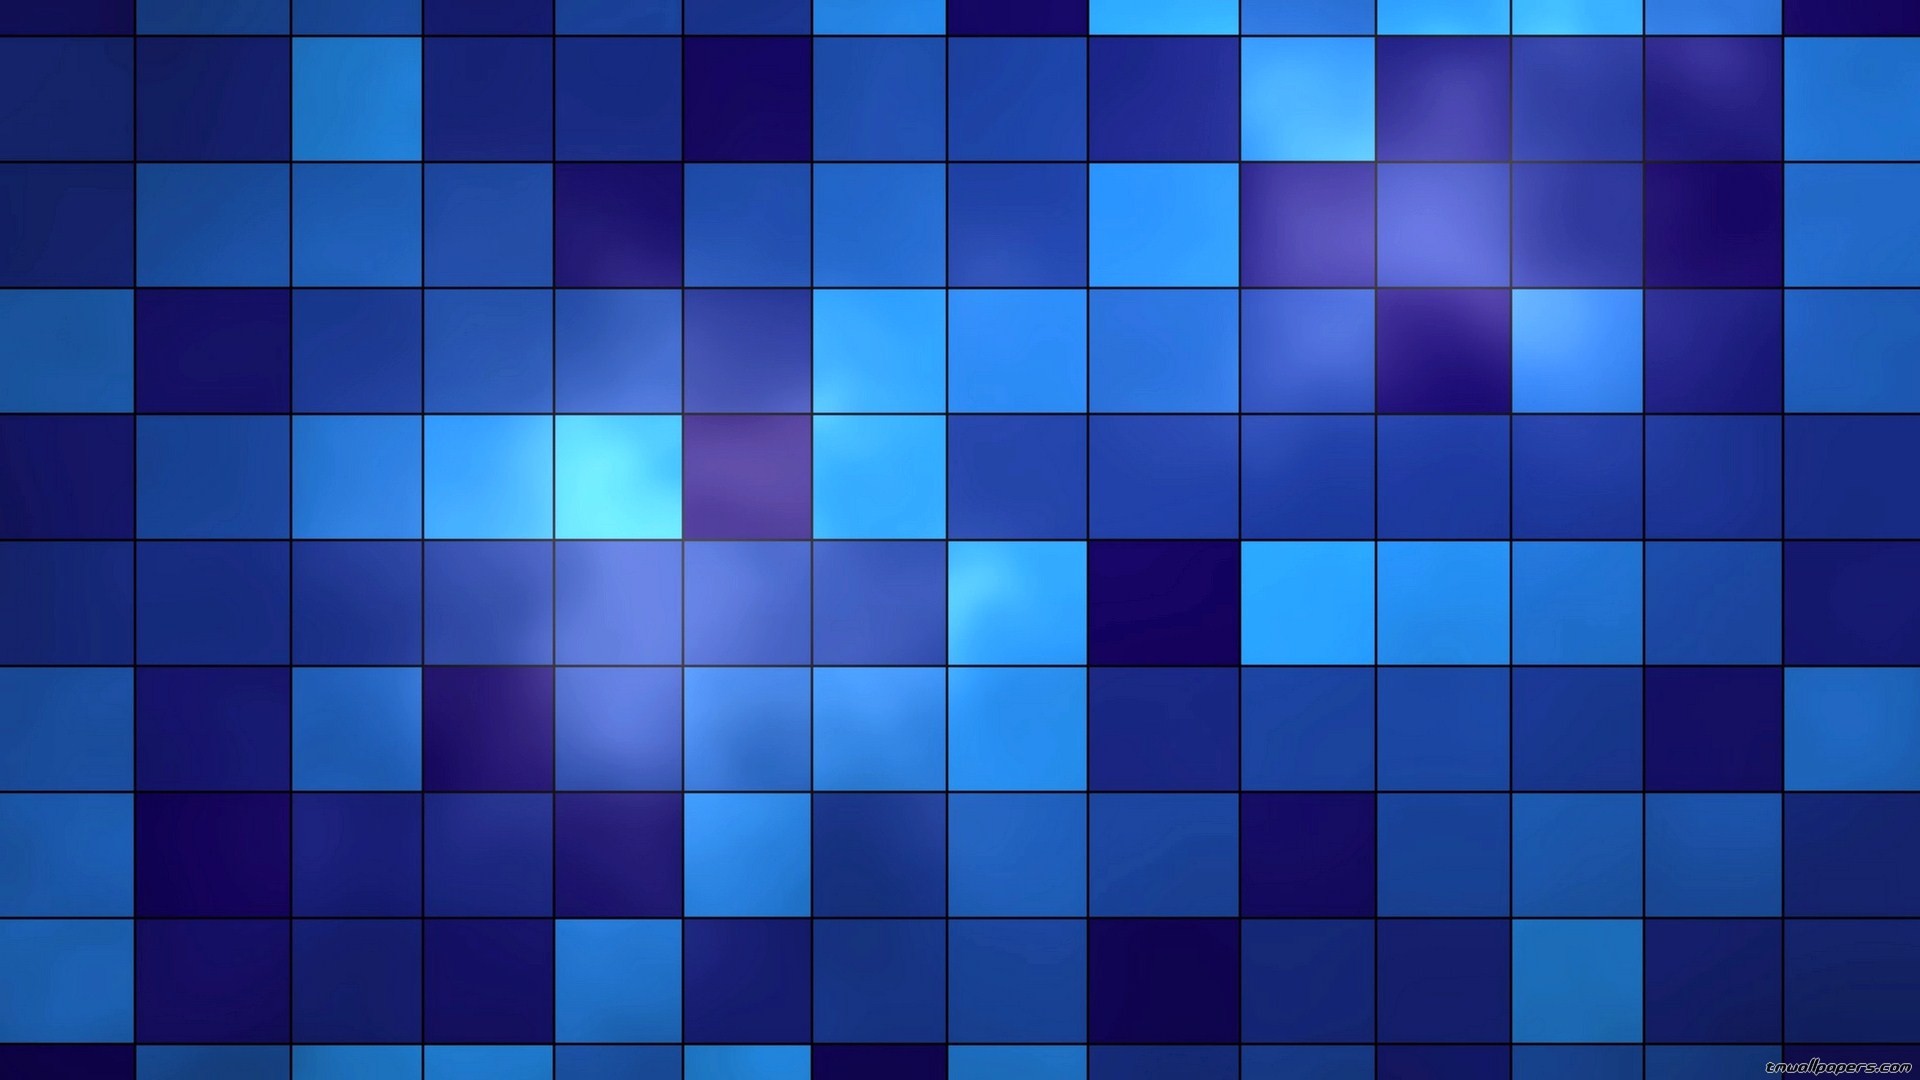 1920x1080 Blue abstract wide wallpapers 1280x800 1440x900 1680x1050 1920x1200